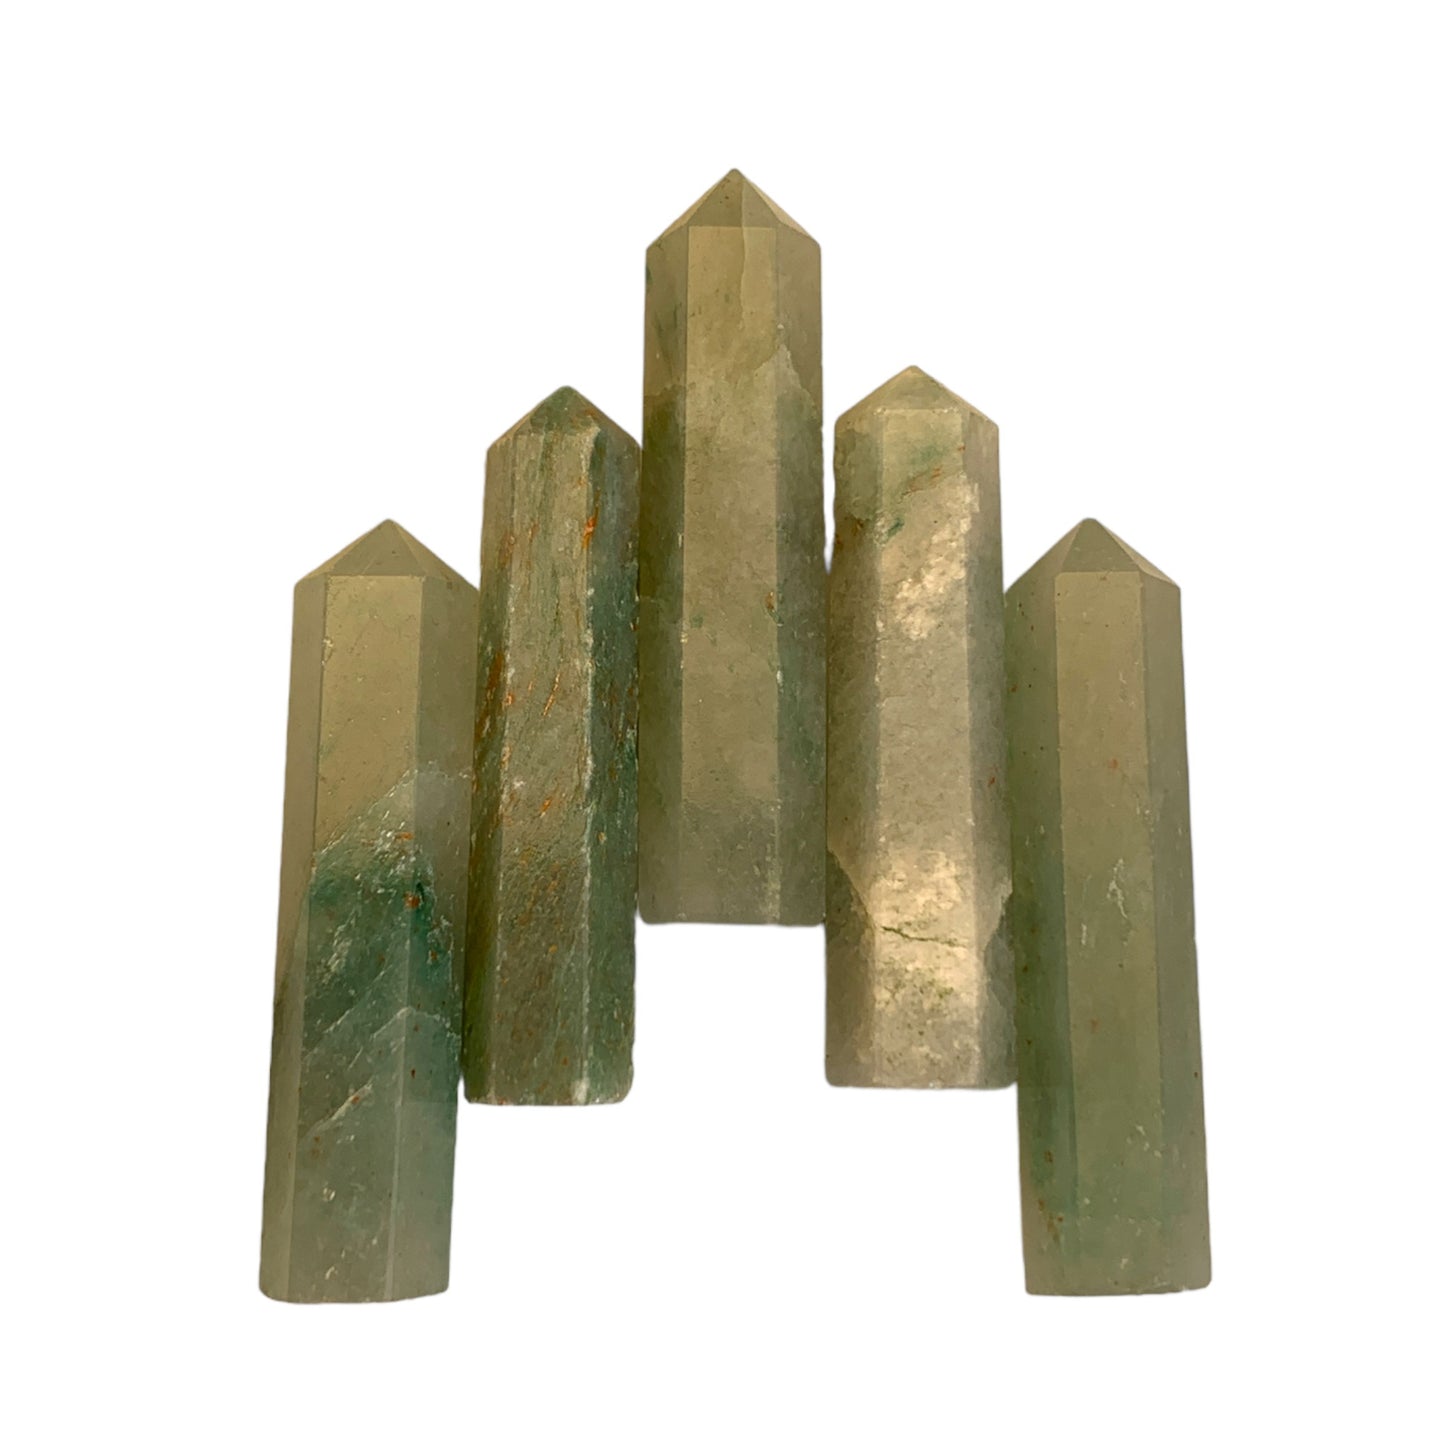 Green Jade - 25-35mm - Single Terminated Pencil Points - (retail purchase as singles, wholesale min order 5) - NEW1020 - India